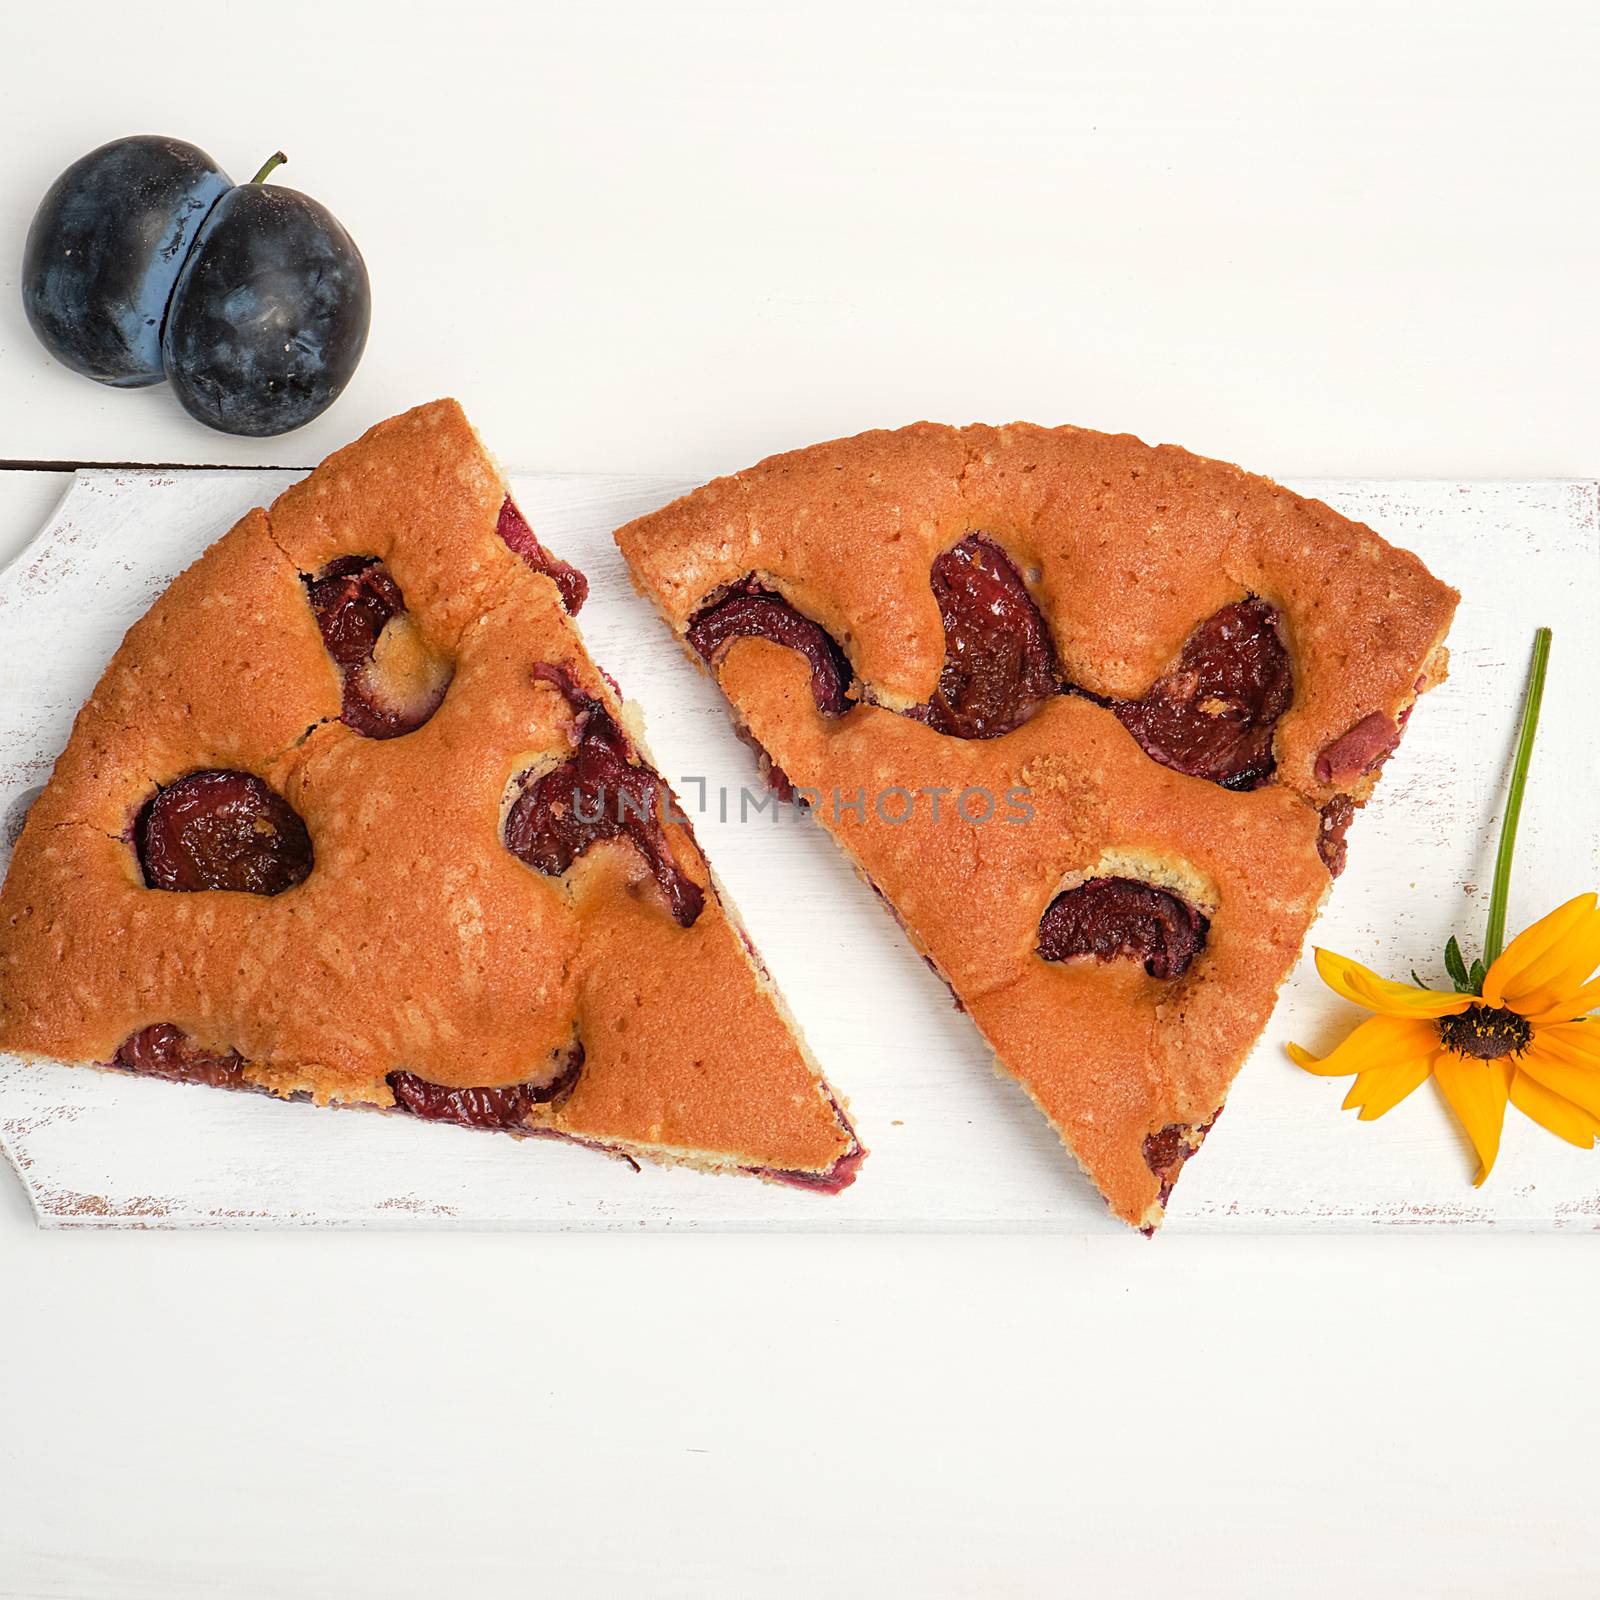 slices of biscuit plum cake on a white wooden board  by ndanko